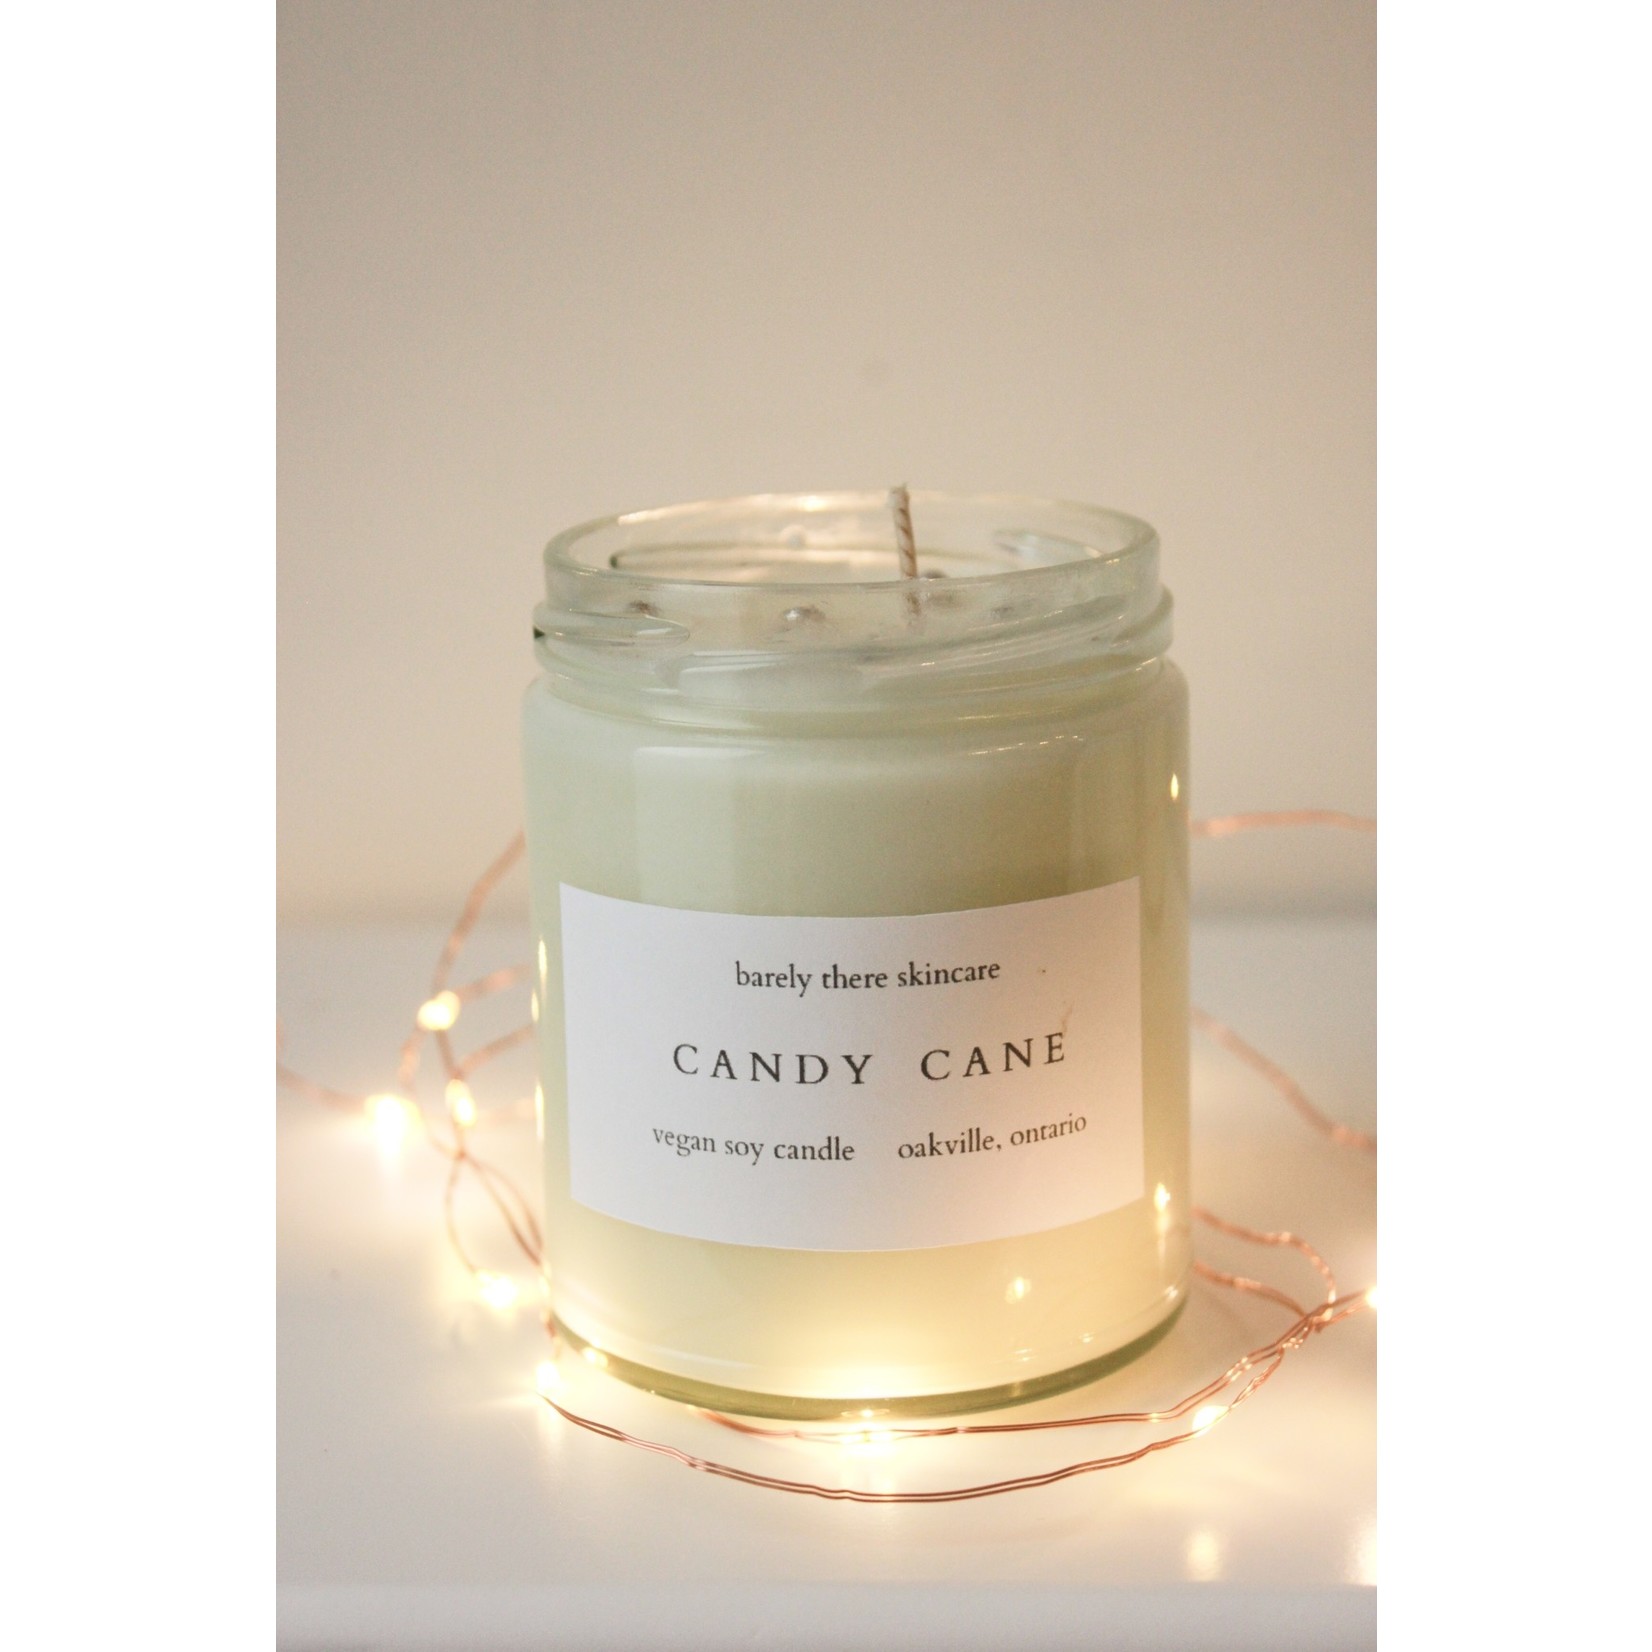 BARELY THERE SKINCARE BARELY THERE CANDY CANE CANDLE